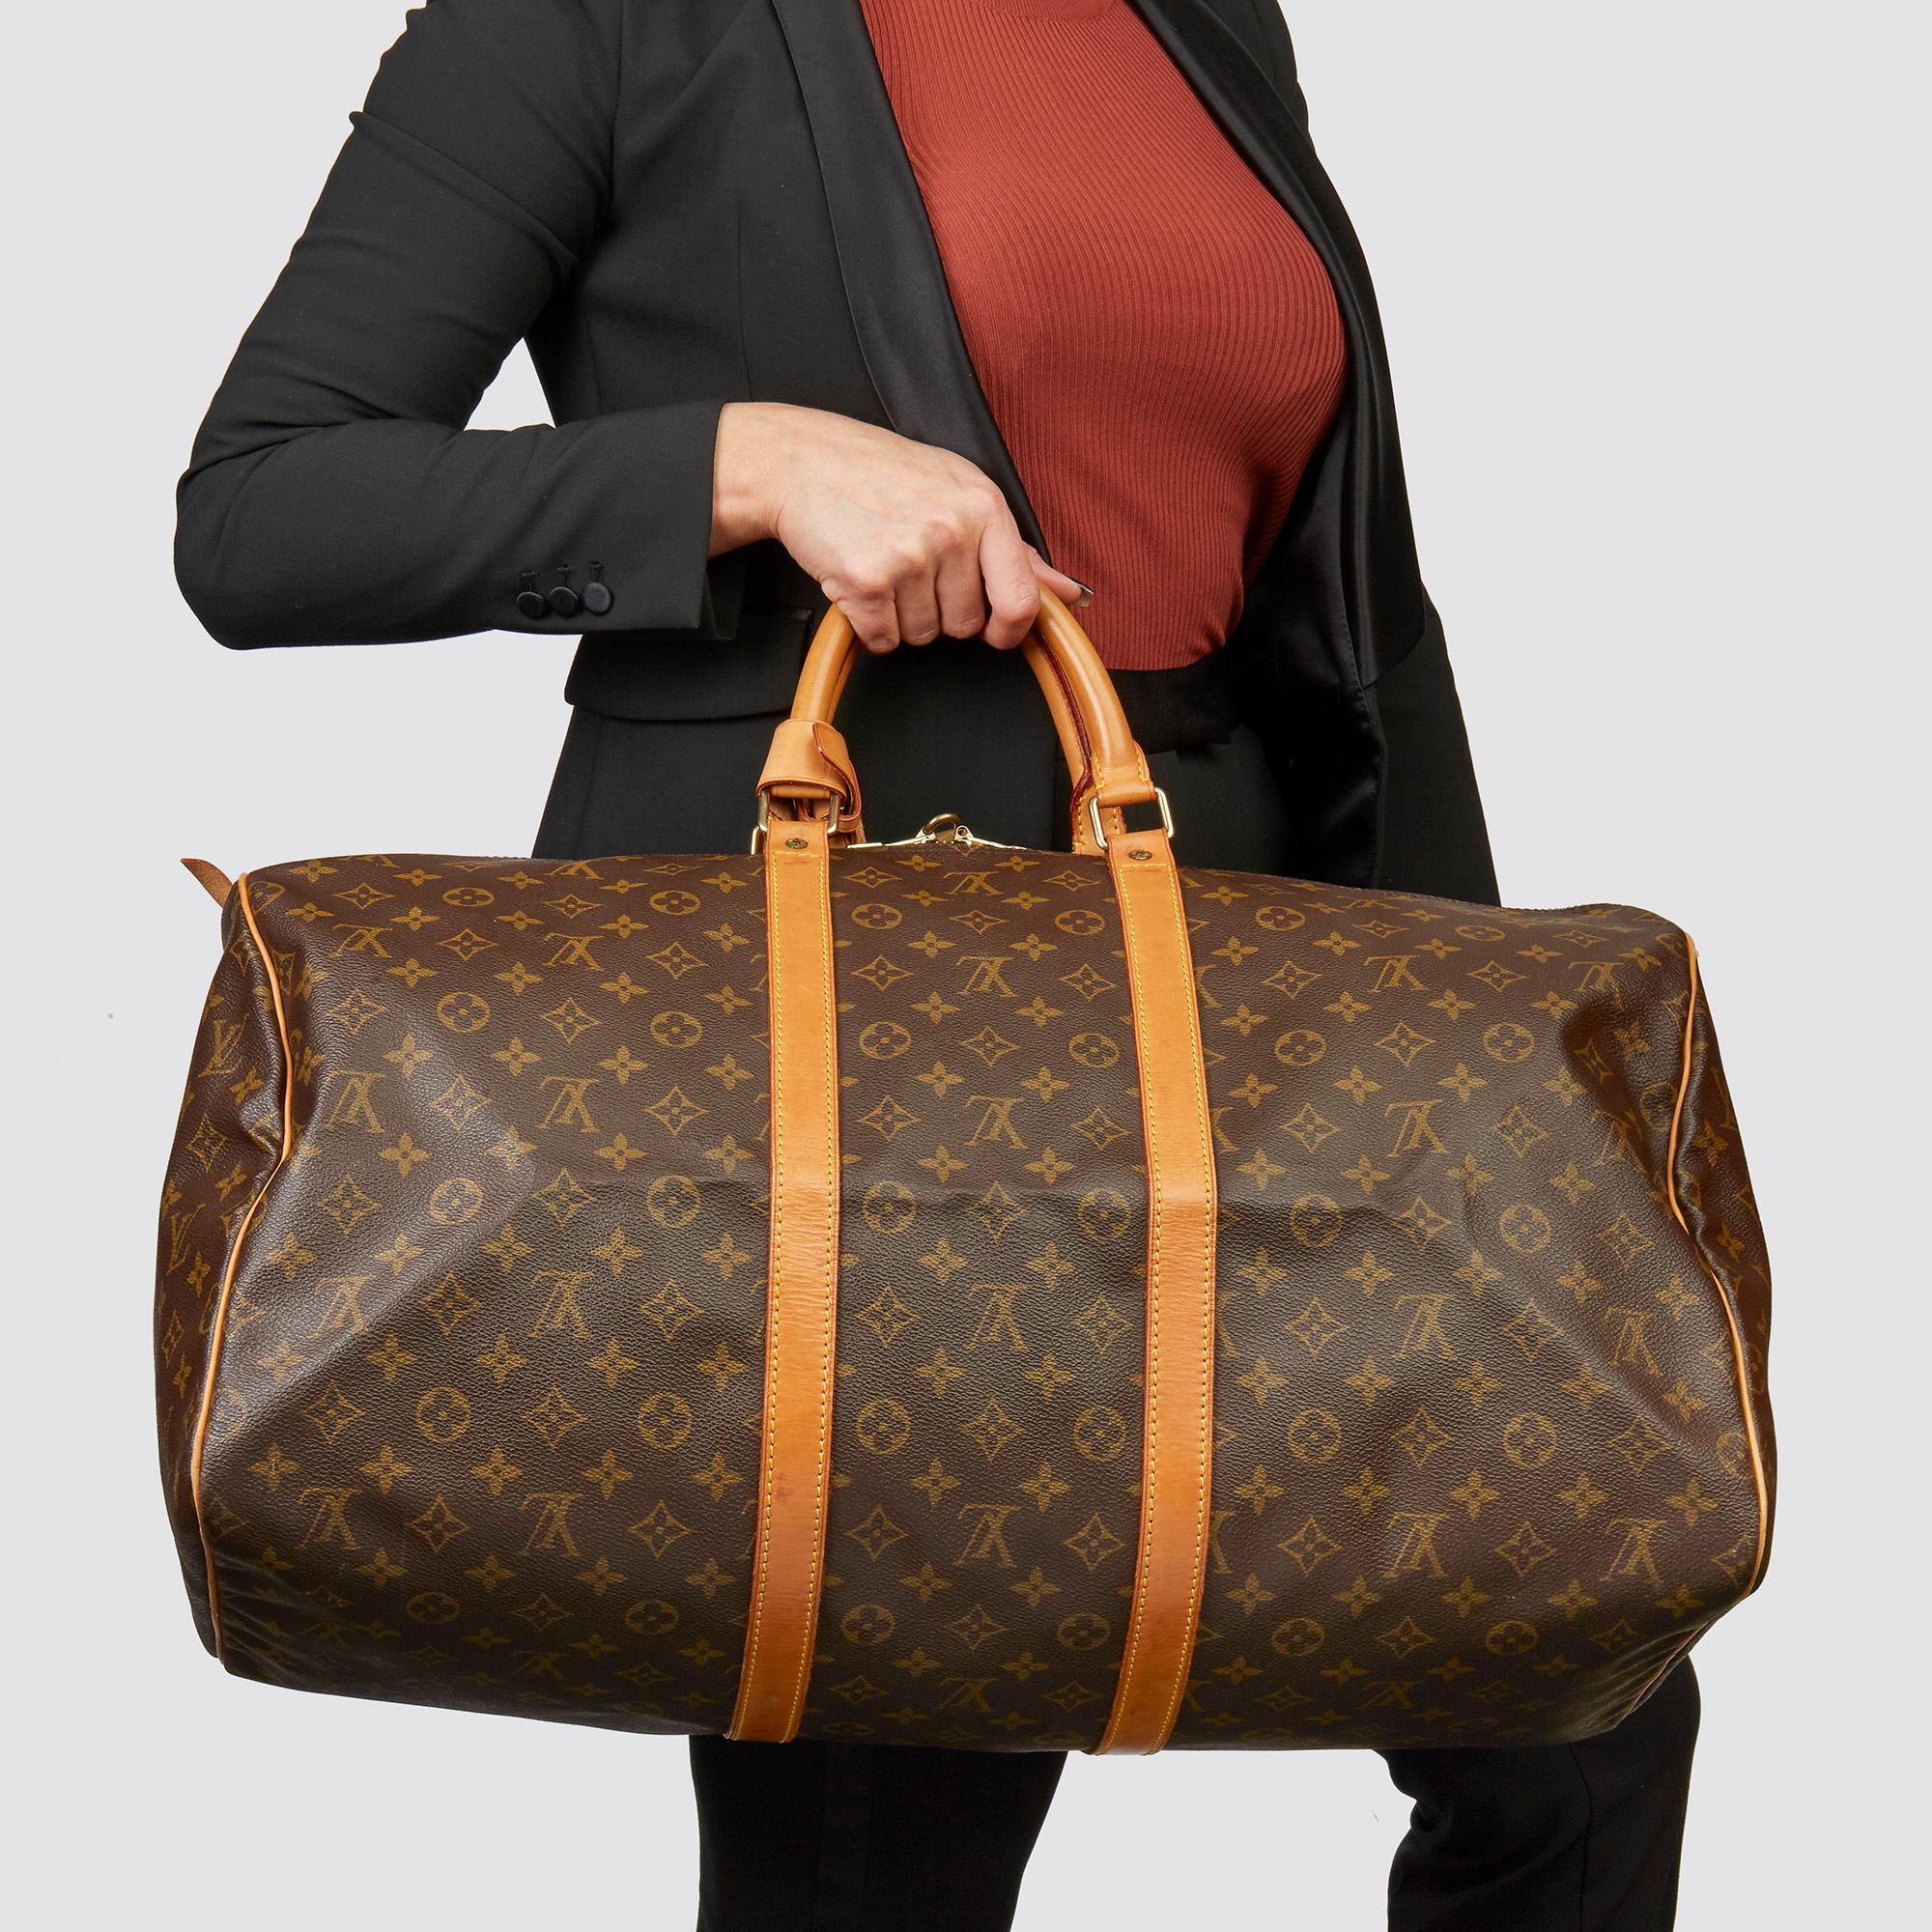 LOUIS VUITTON
Brown Monogram Coated Canvas & Vachetta Leather Vintage Keepall 55

Xupes Reference: HB3584
Serial Number: MI8904
Age (Circa): 1994
Accompanied By: Handle Keeper, Luggage Tag
Authenticity Details: Date Stamp (Made in France) 
Gender: